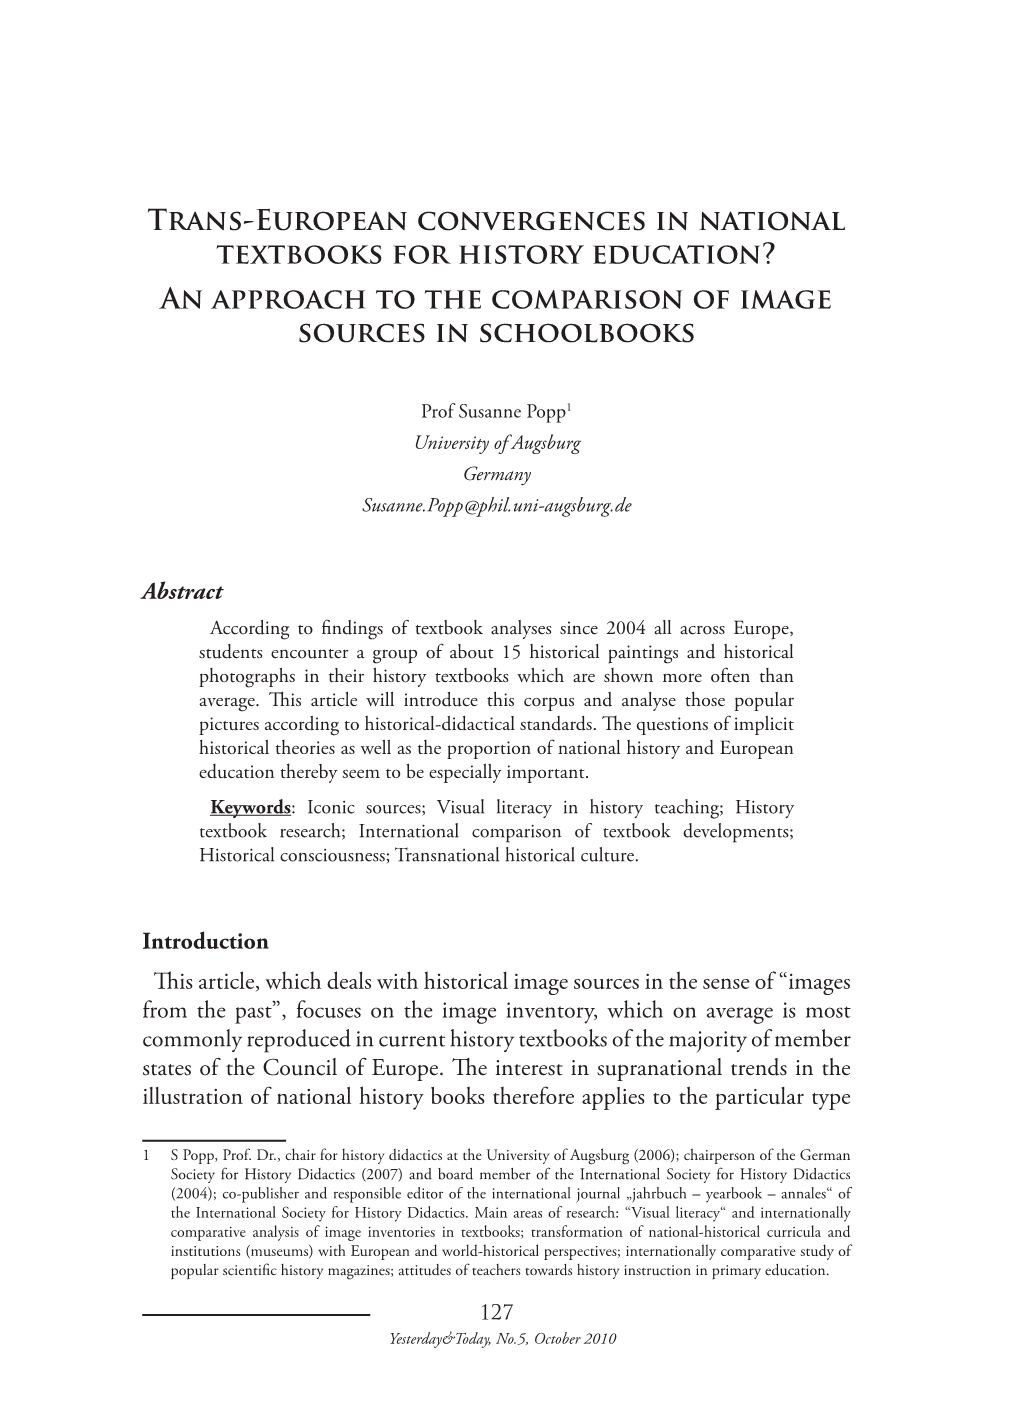 Trans-European Convergences in National Textbooks for History Education? an Approach to the Comparison of Image Sources in Schoolbooks